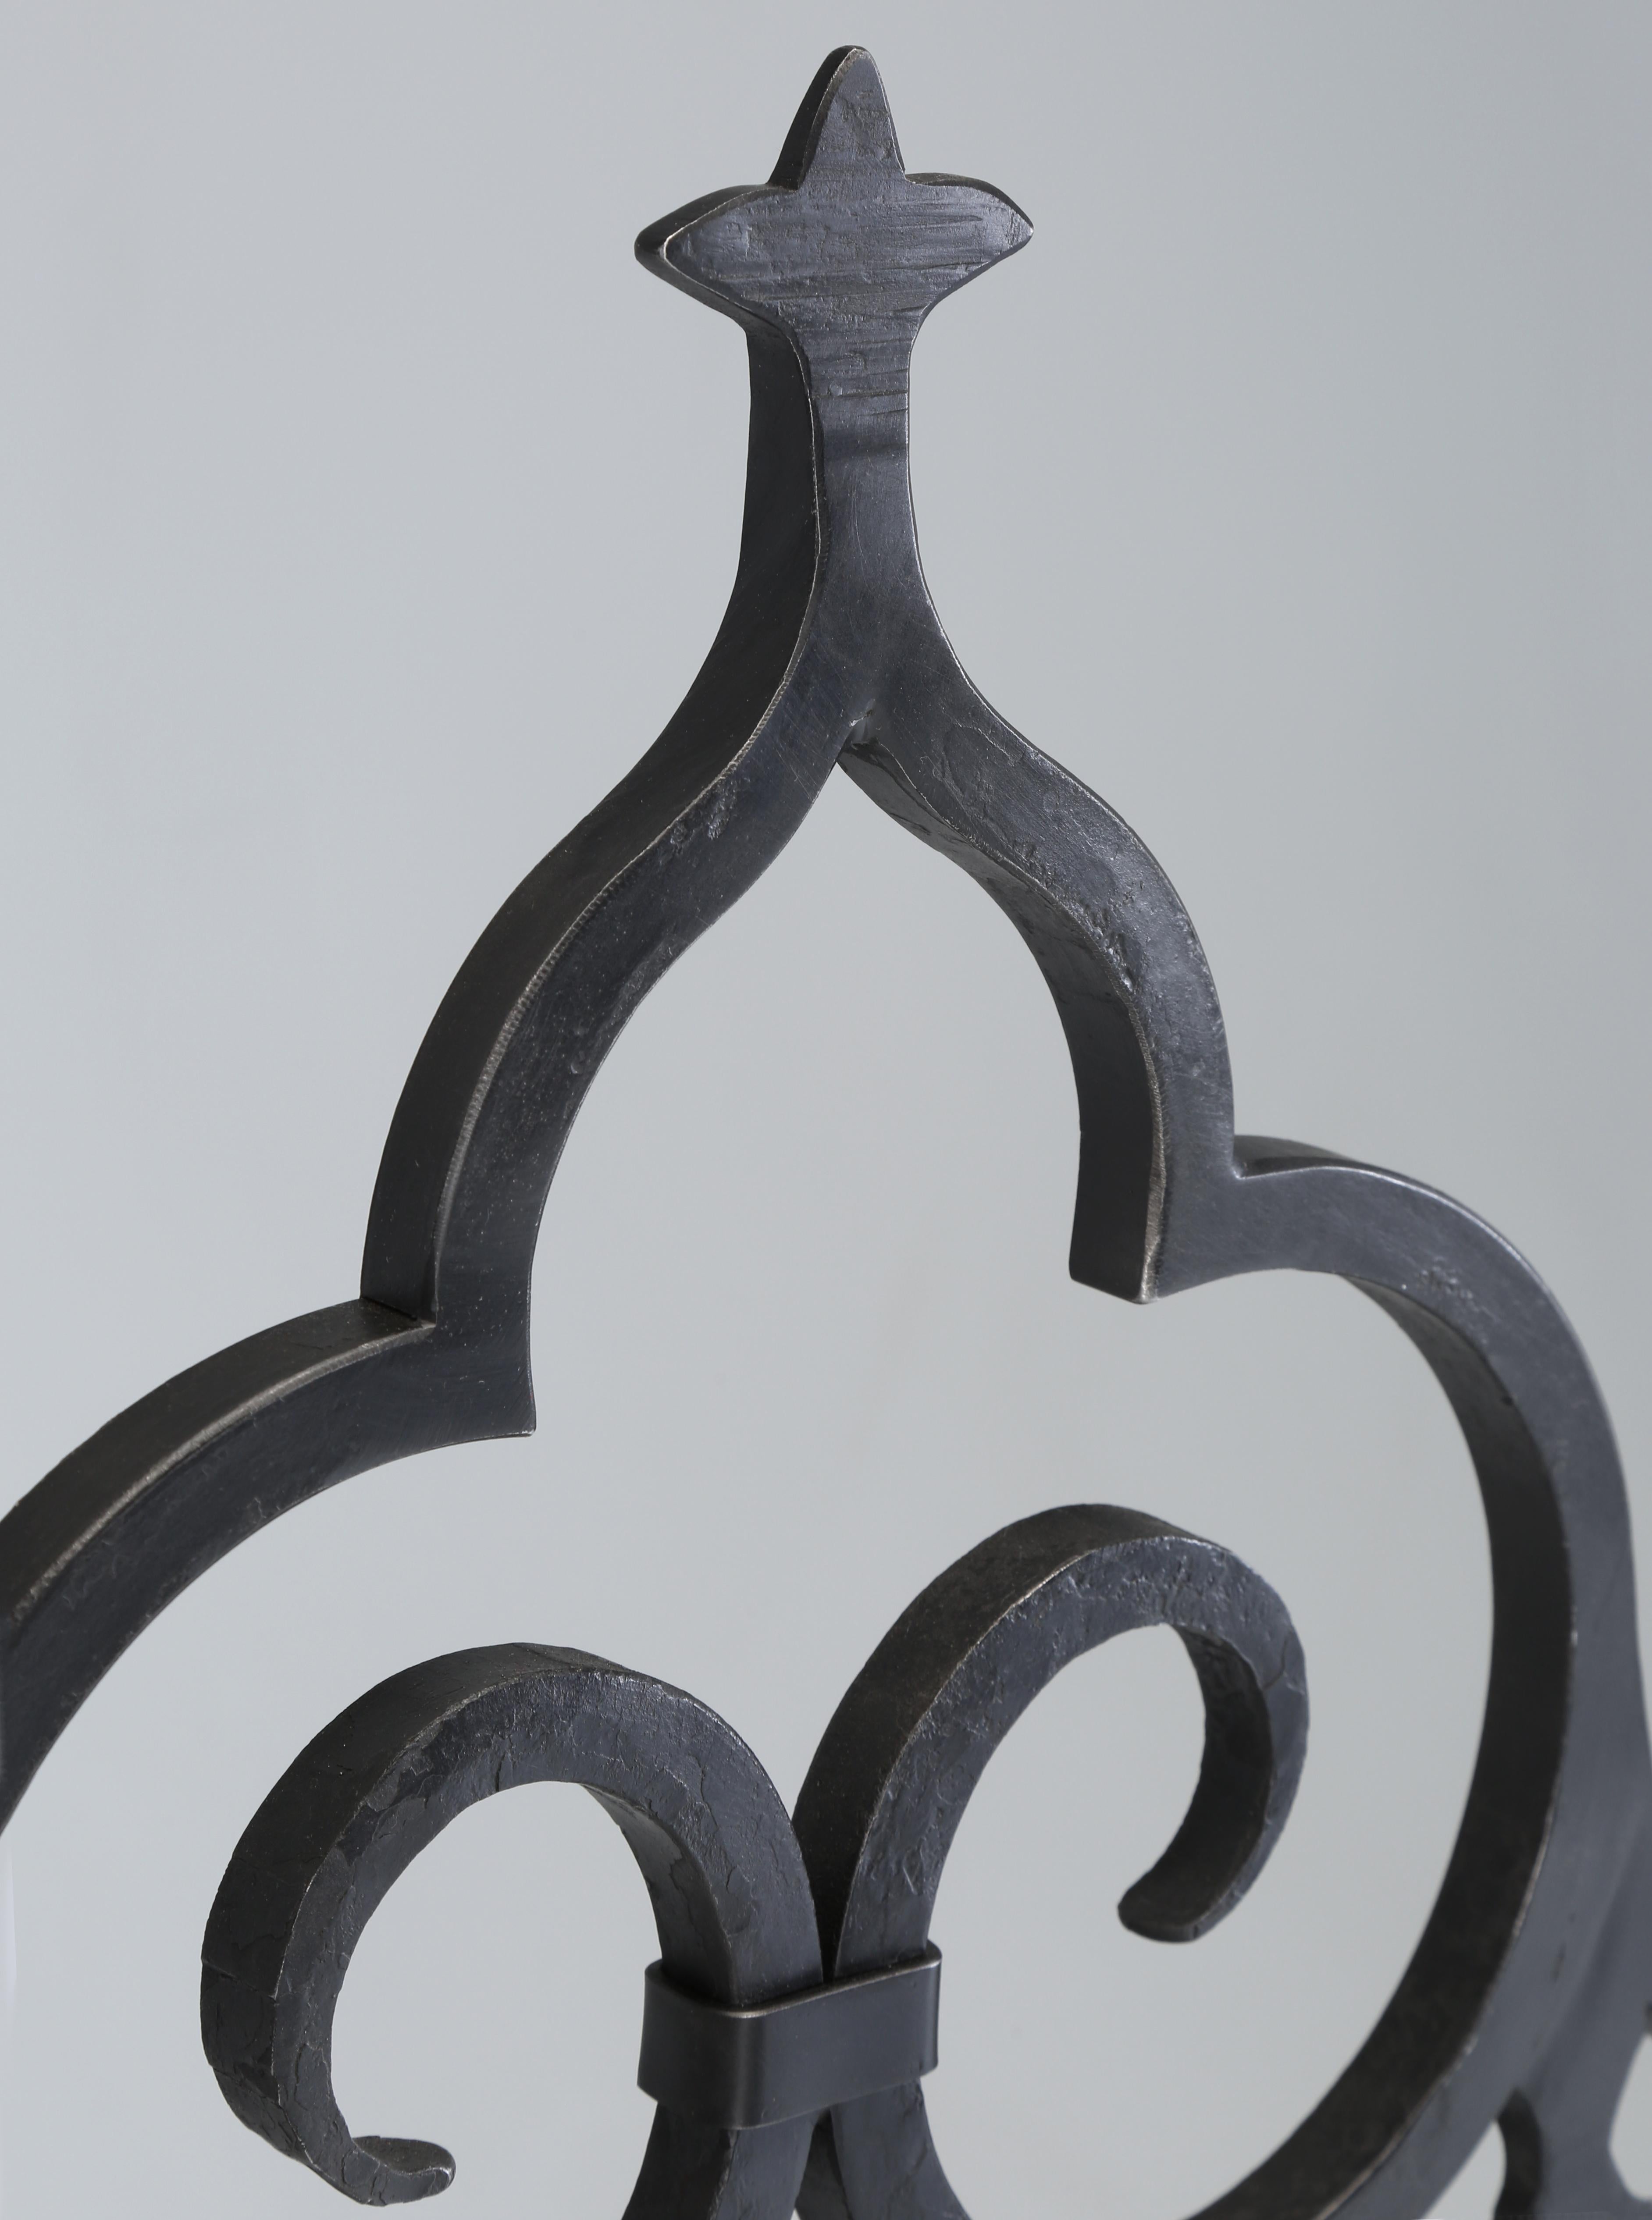 Moorish Hand-Wrought Iron Made to Order Old Plank Fireplace Screen Mediterranean Style For Sale